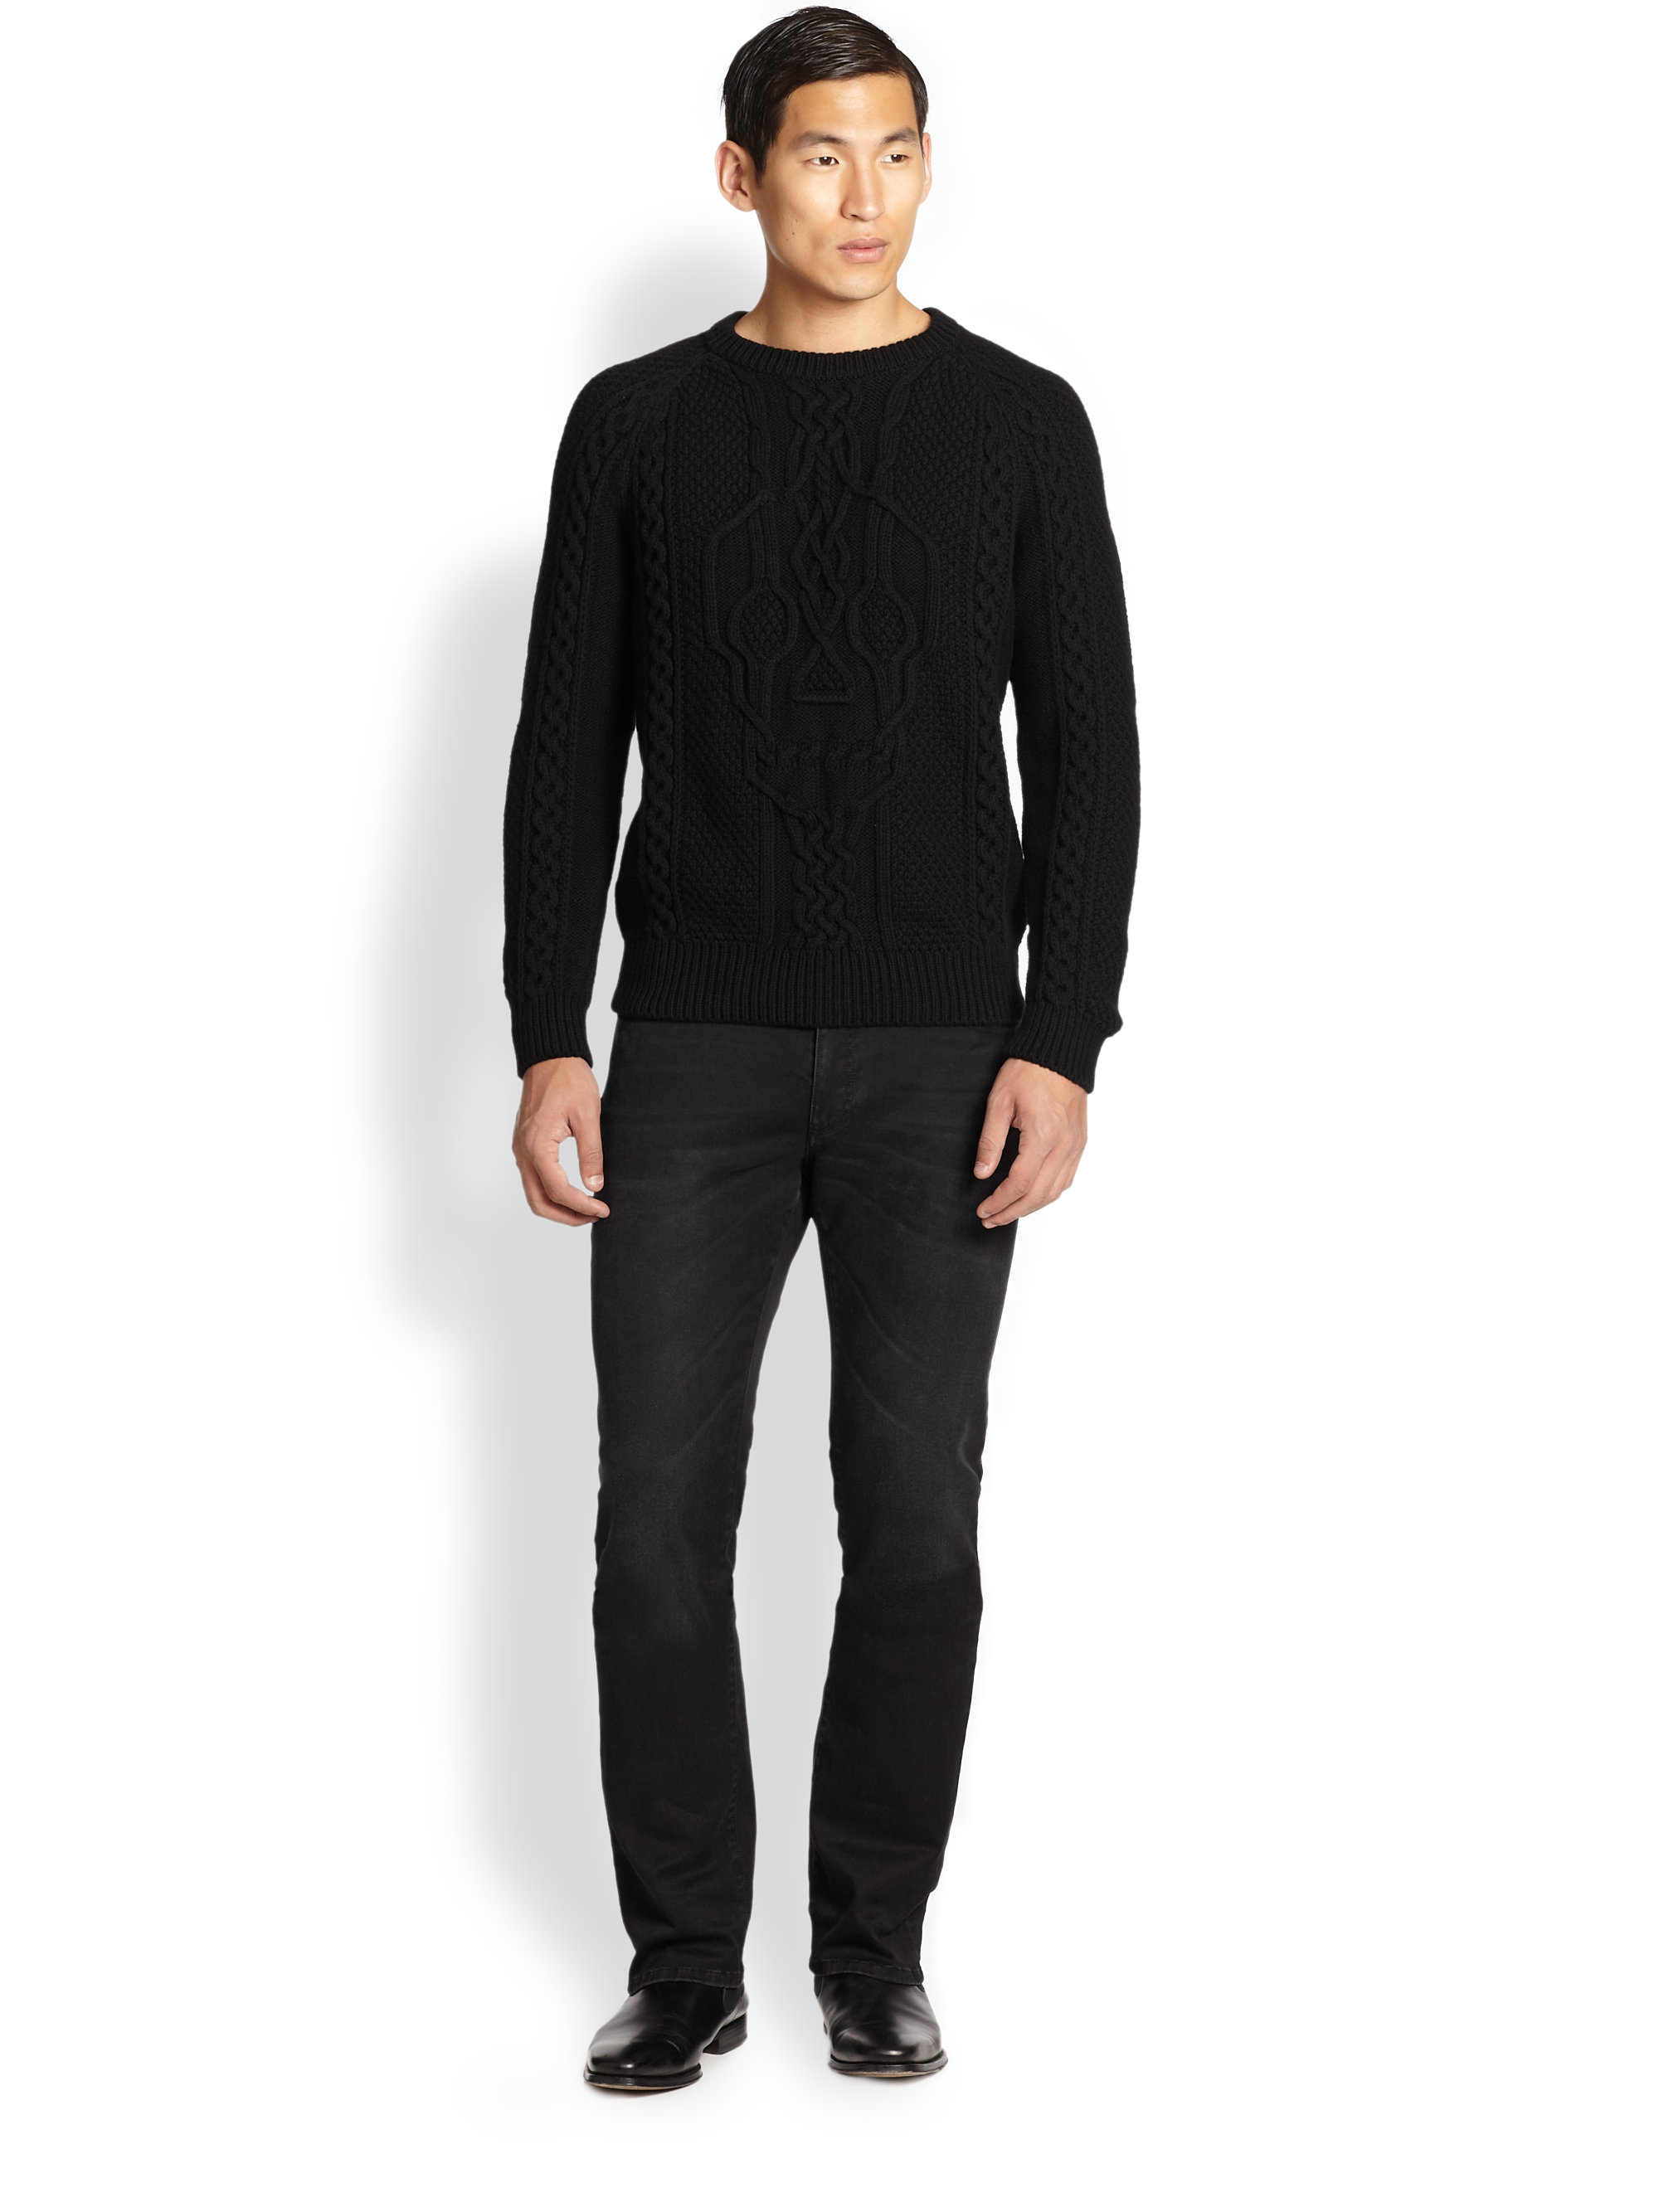 Alexander mcqueen Skull Cable Knit Sweater in Black for Men | Lyst